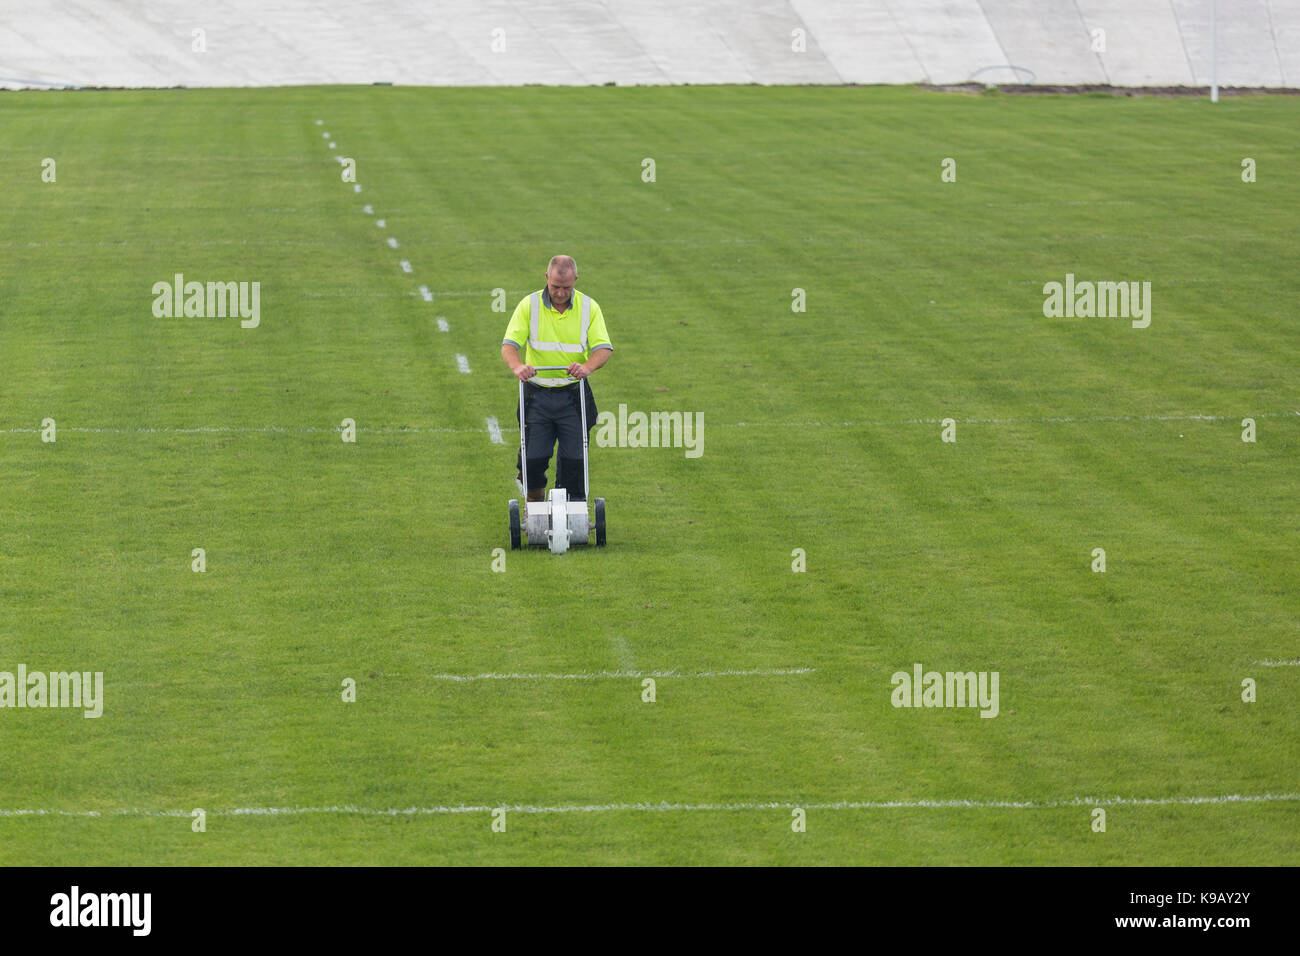 Groundsman marks out rugby pitch lines on field Stock Photo